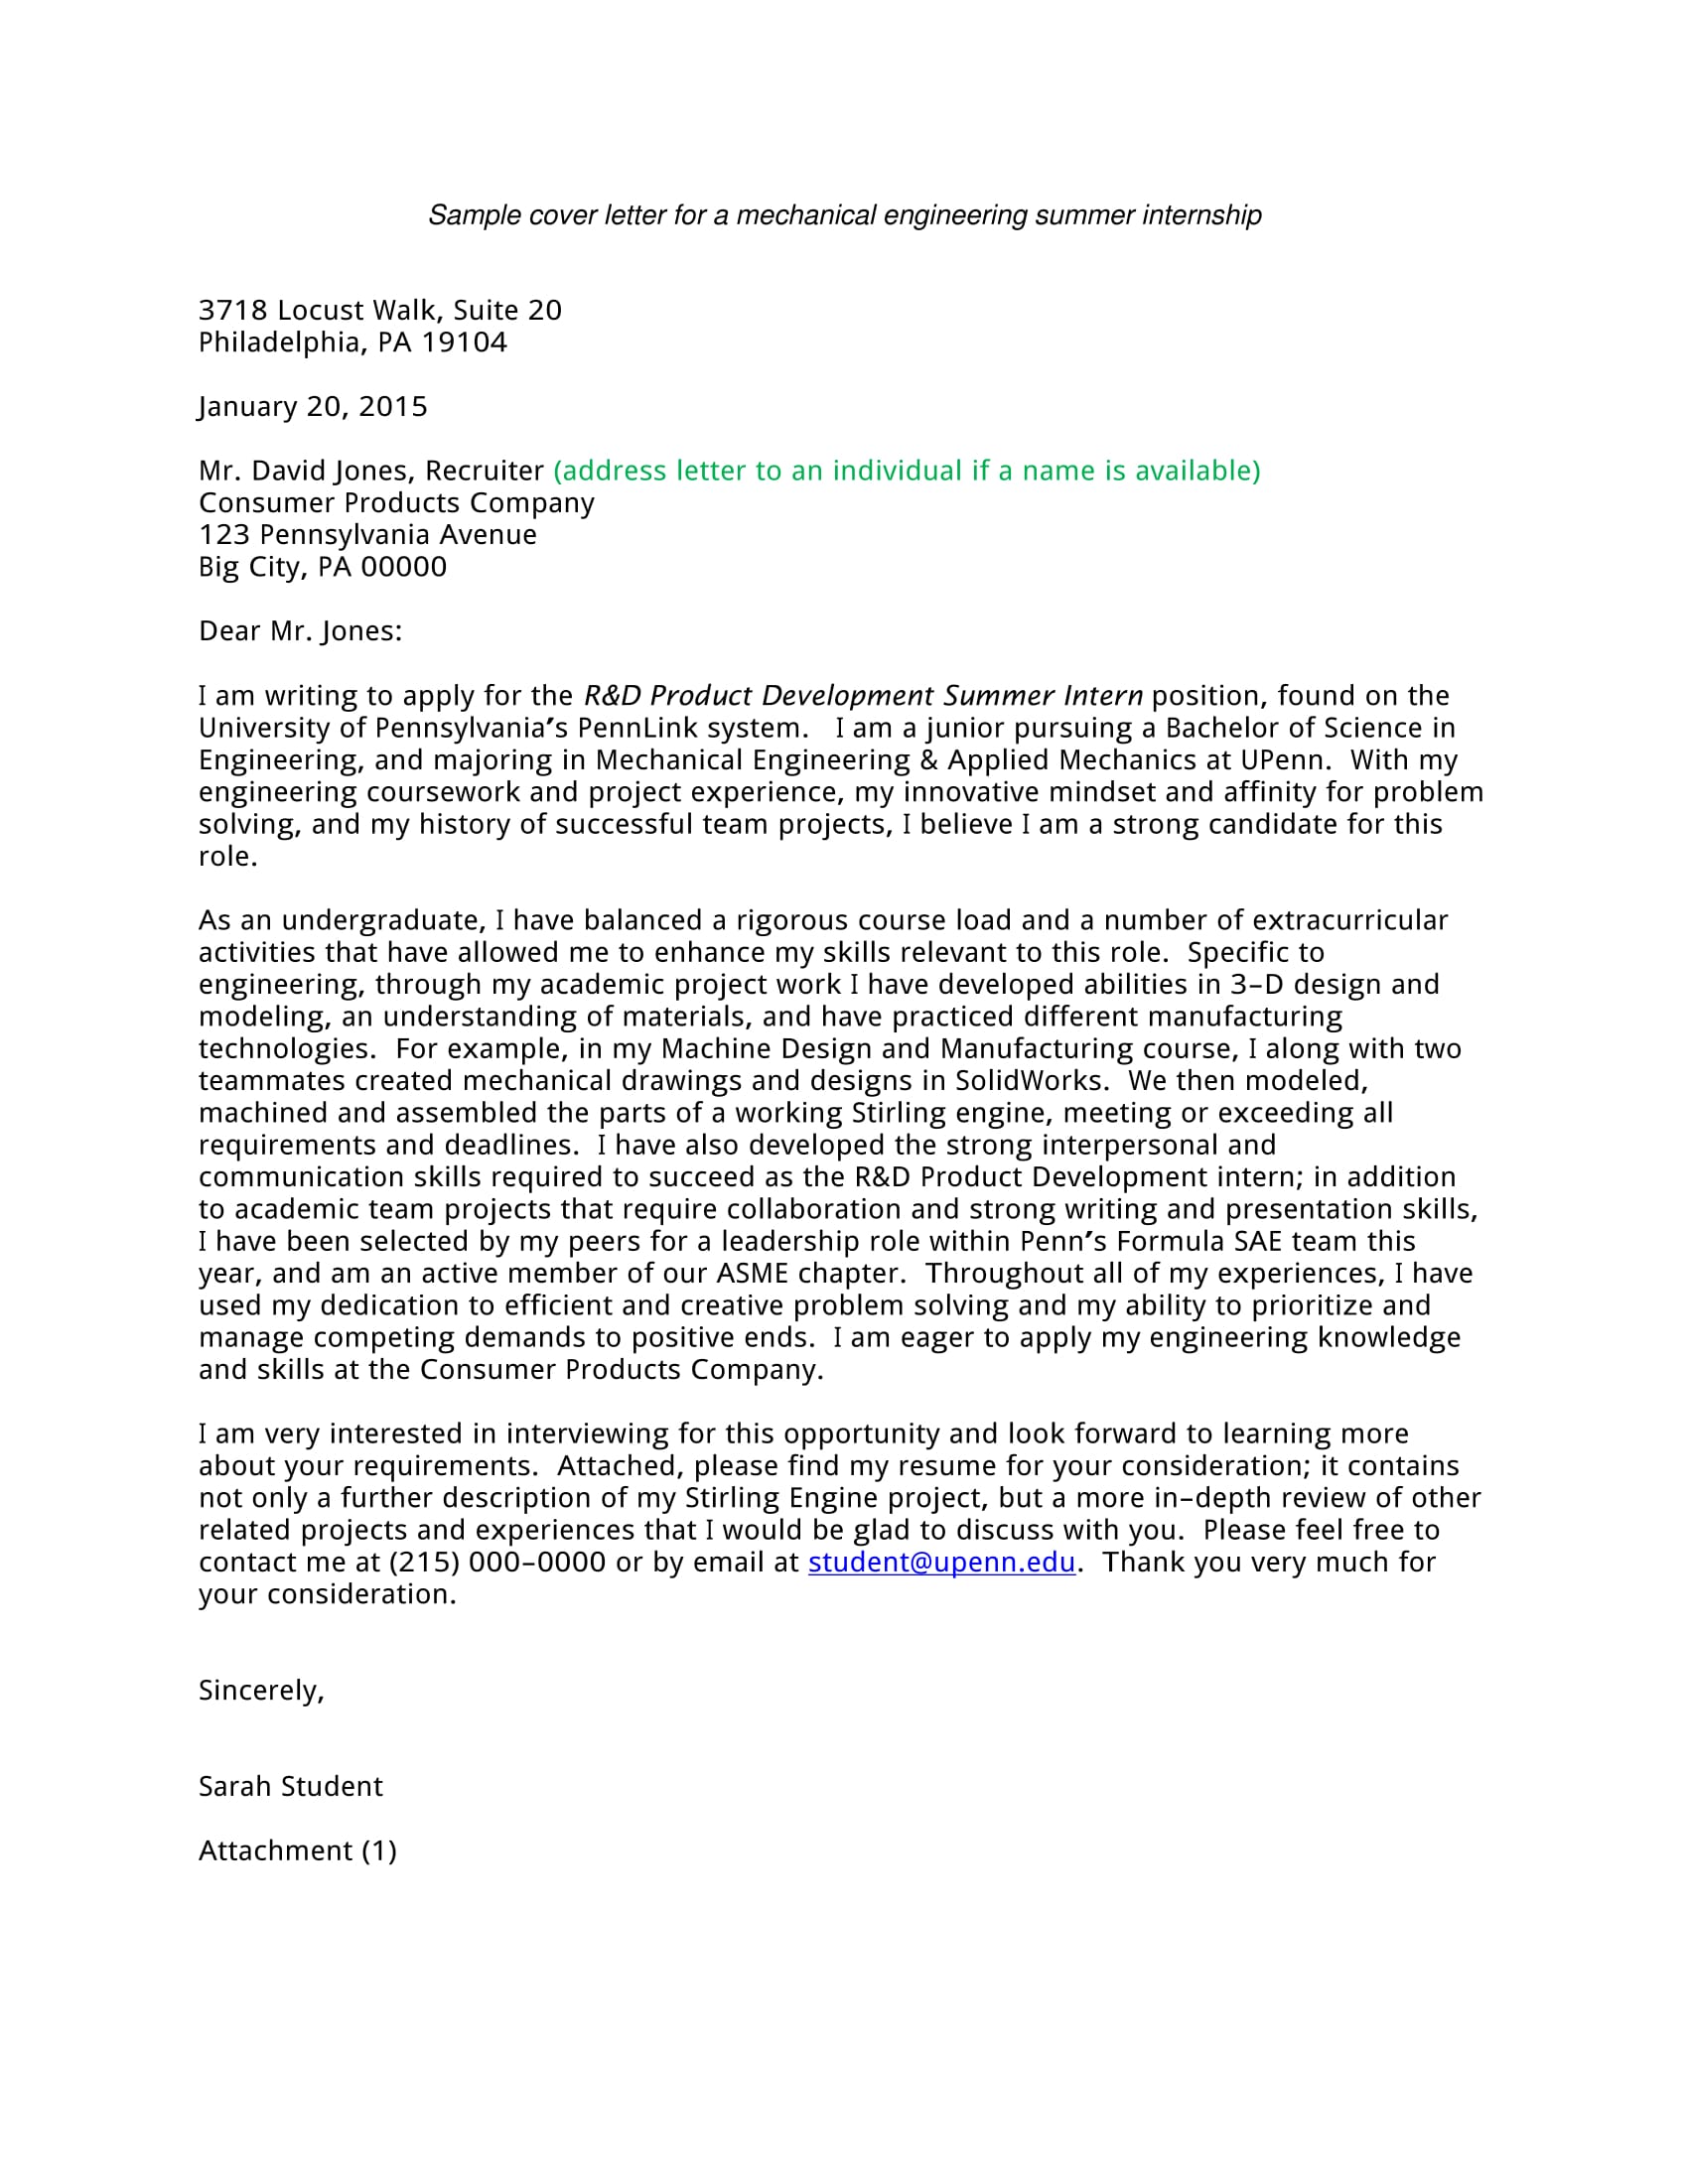 Cover Letter Sample for Internship - How Can I Apply for ... (1700 x 2200 Pixel)